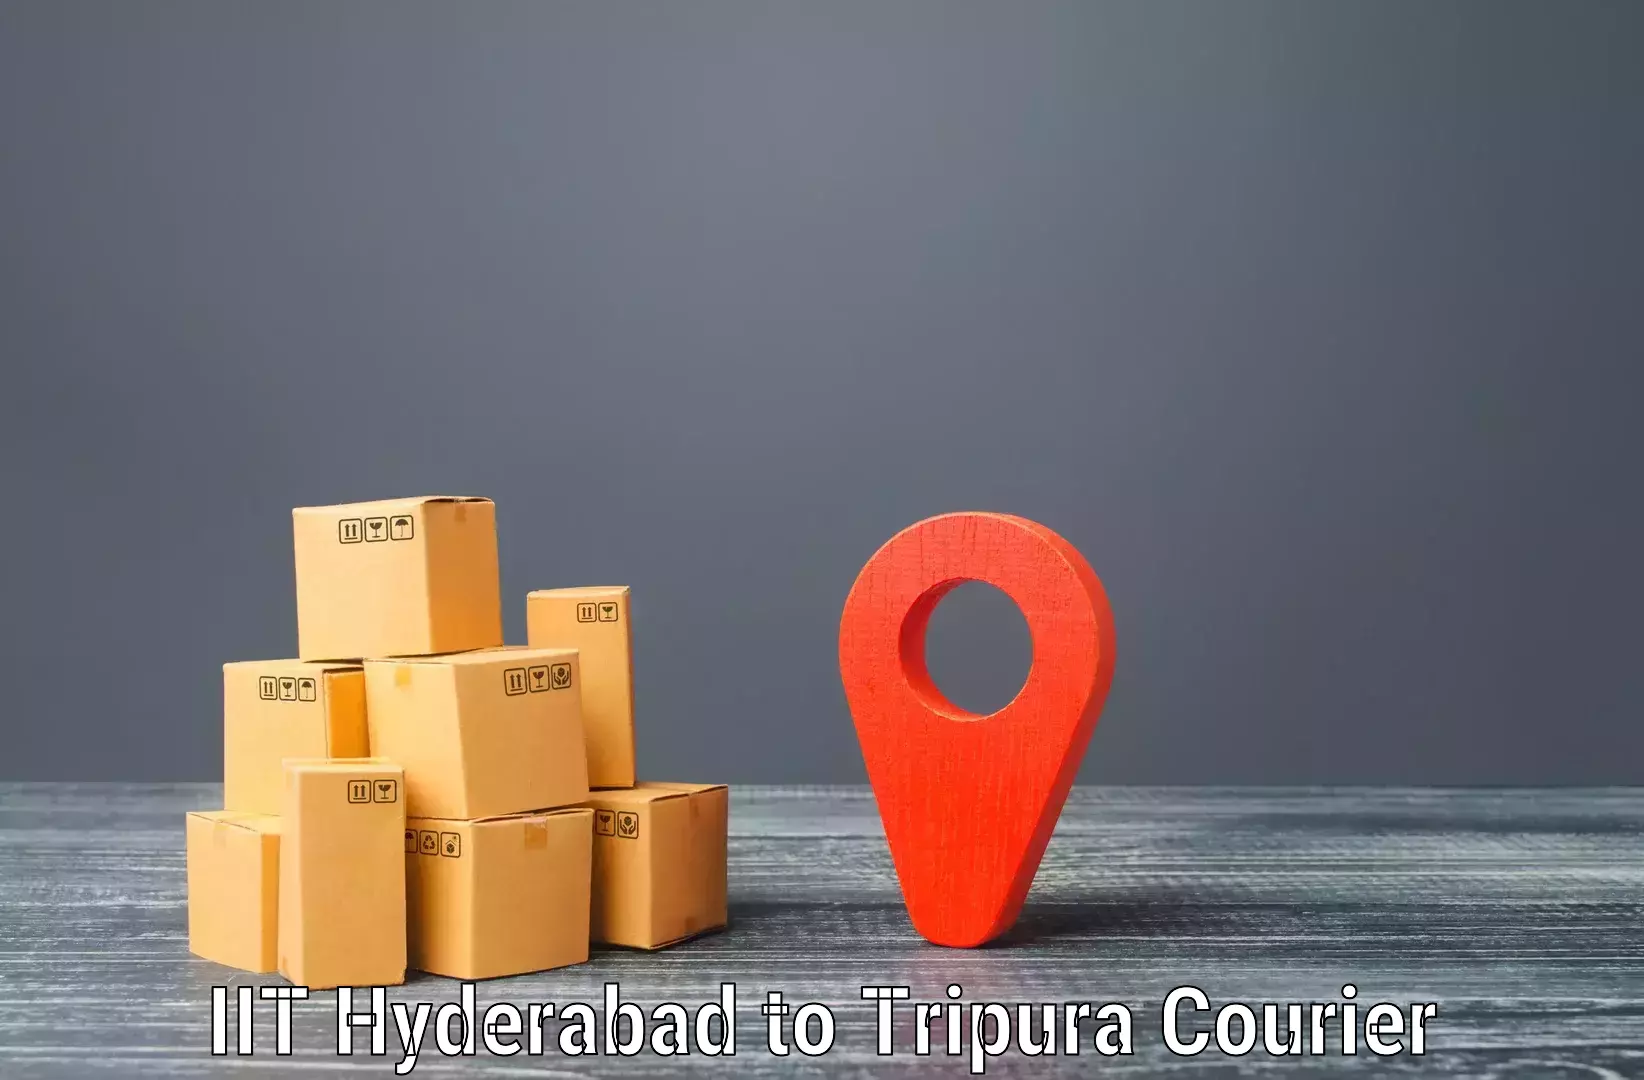 Seamless shipping service IIT Hyderabad to Udaipur Tripura